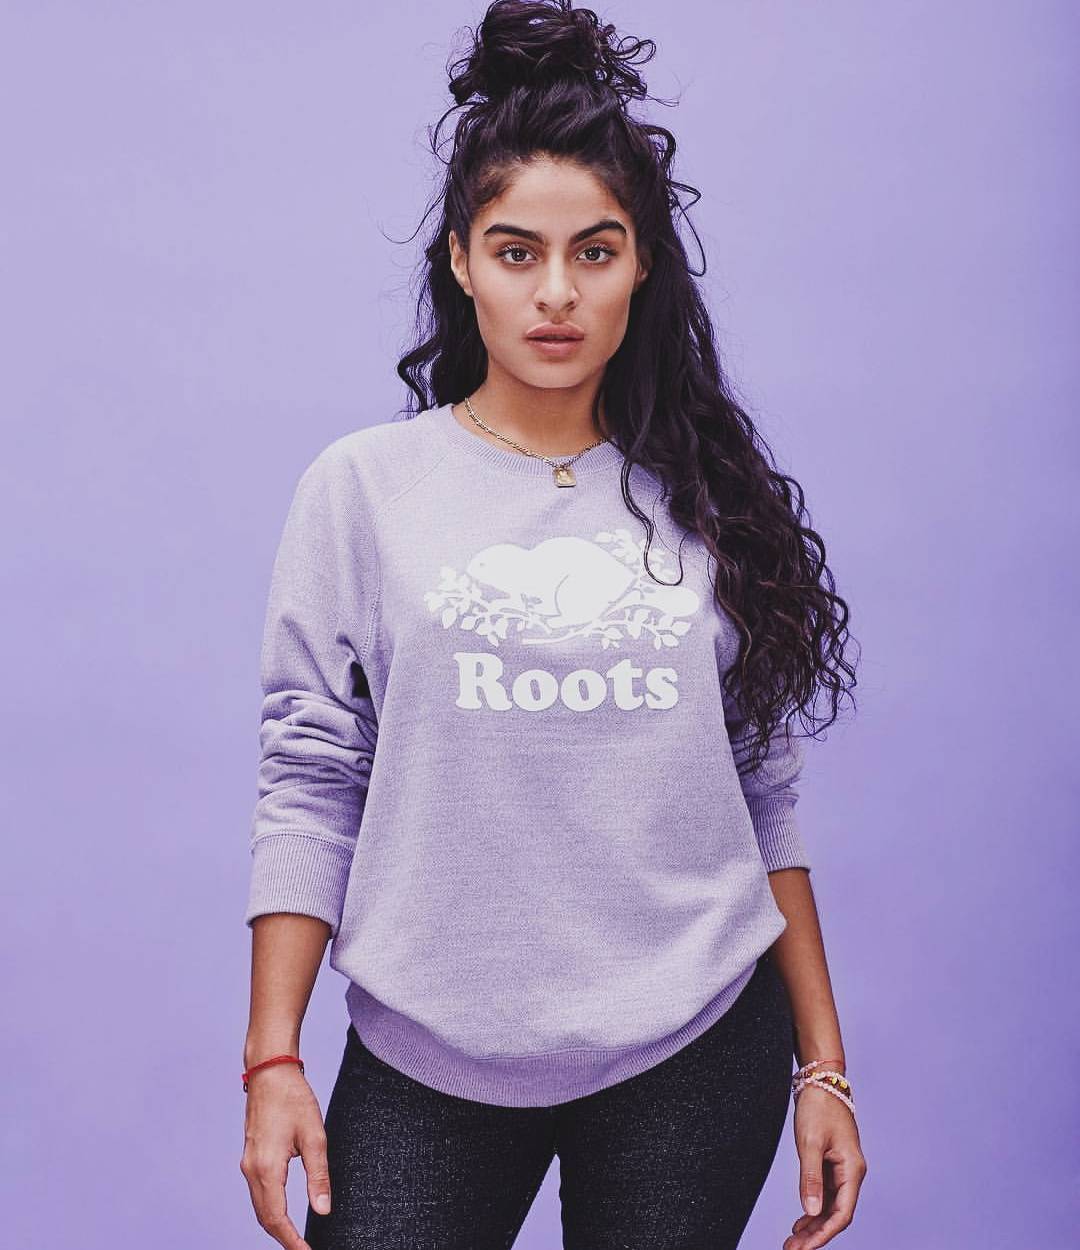 51 Hot Pictures Of Jessie Reyez Will Leave You Flabbergasted By Her Hot Magnificence 32